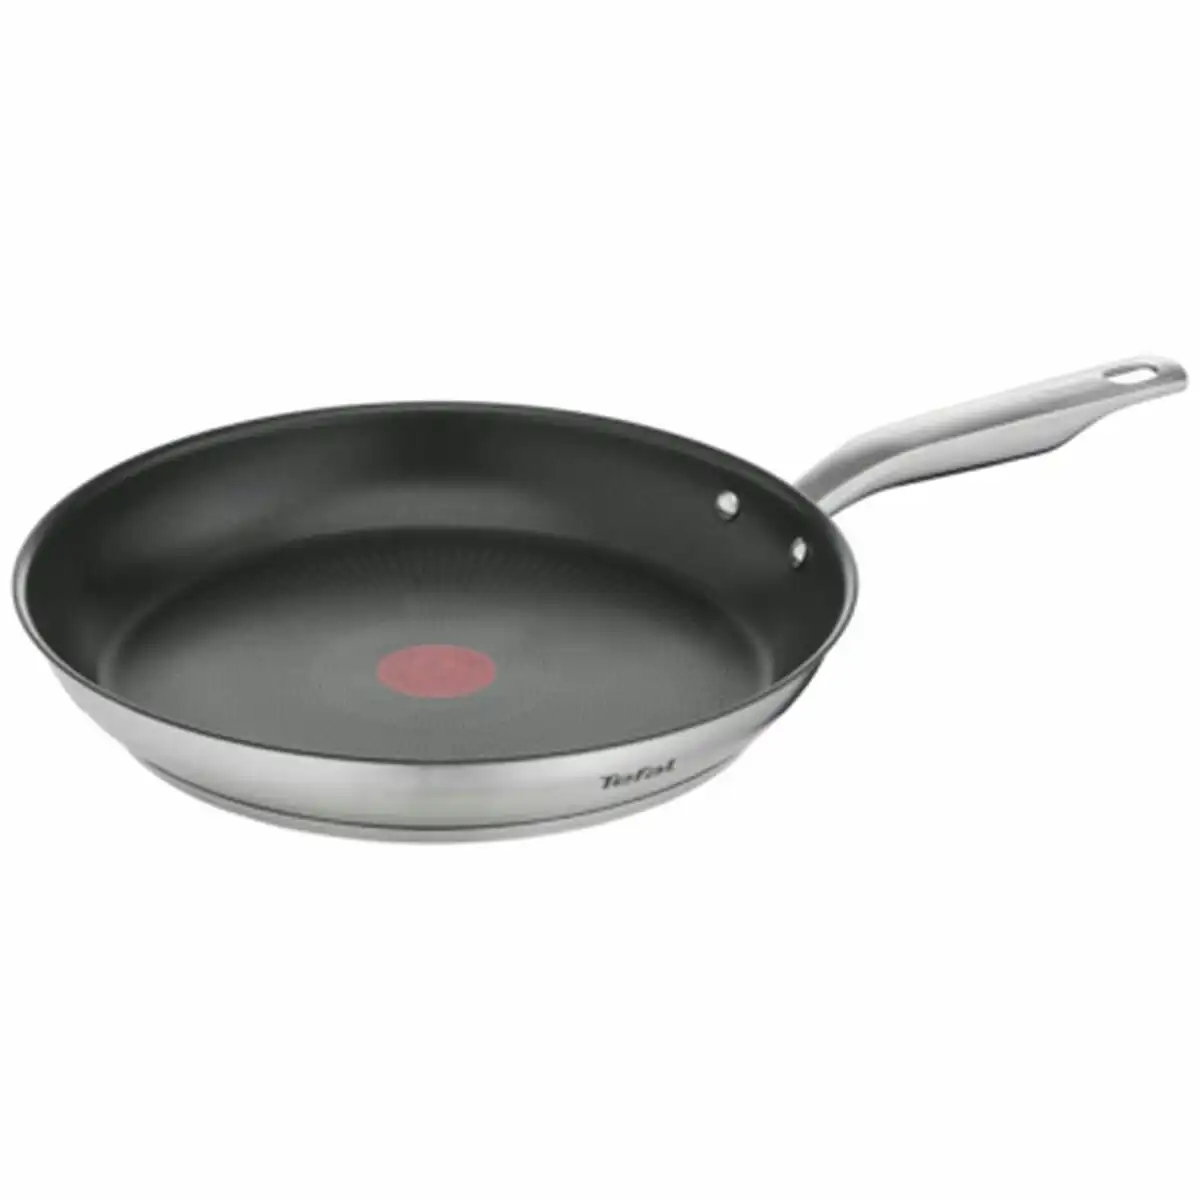 Tefal 24cm Virtuoso Stainless Steel Non-stick Induction Frying Pan